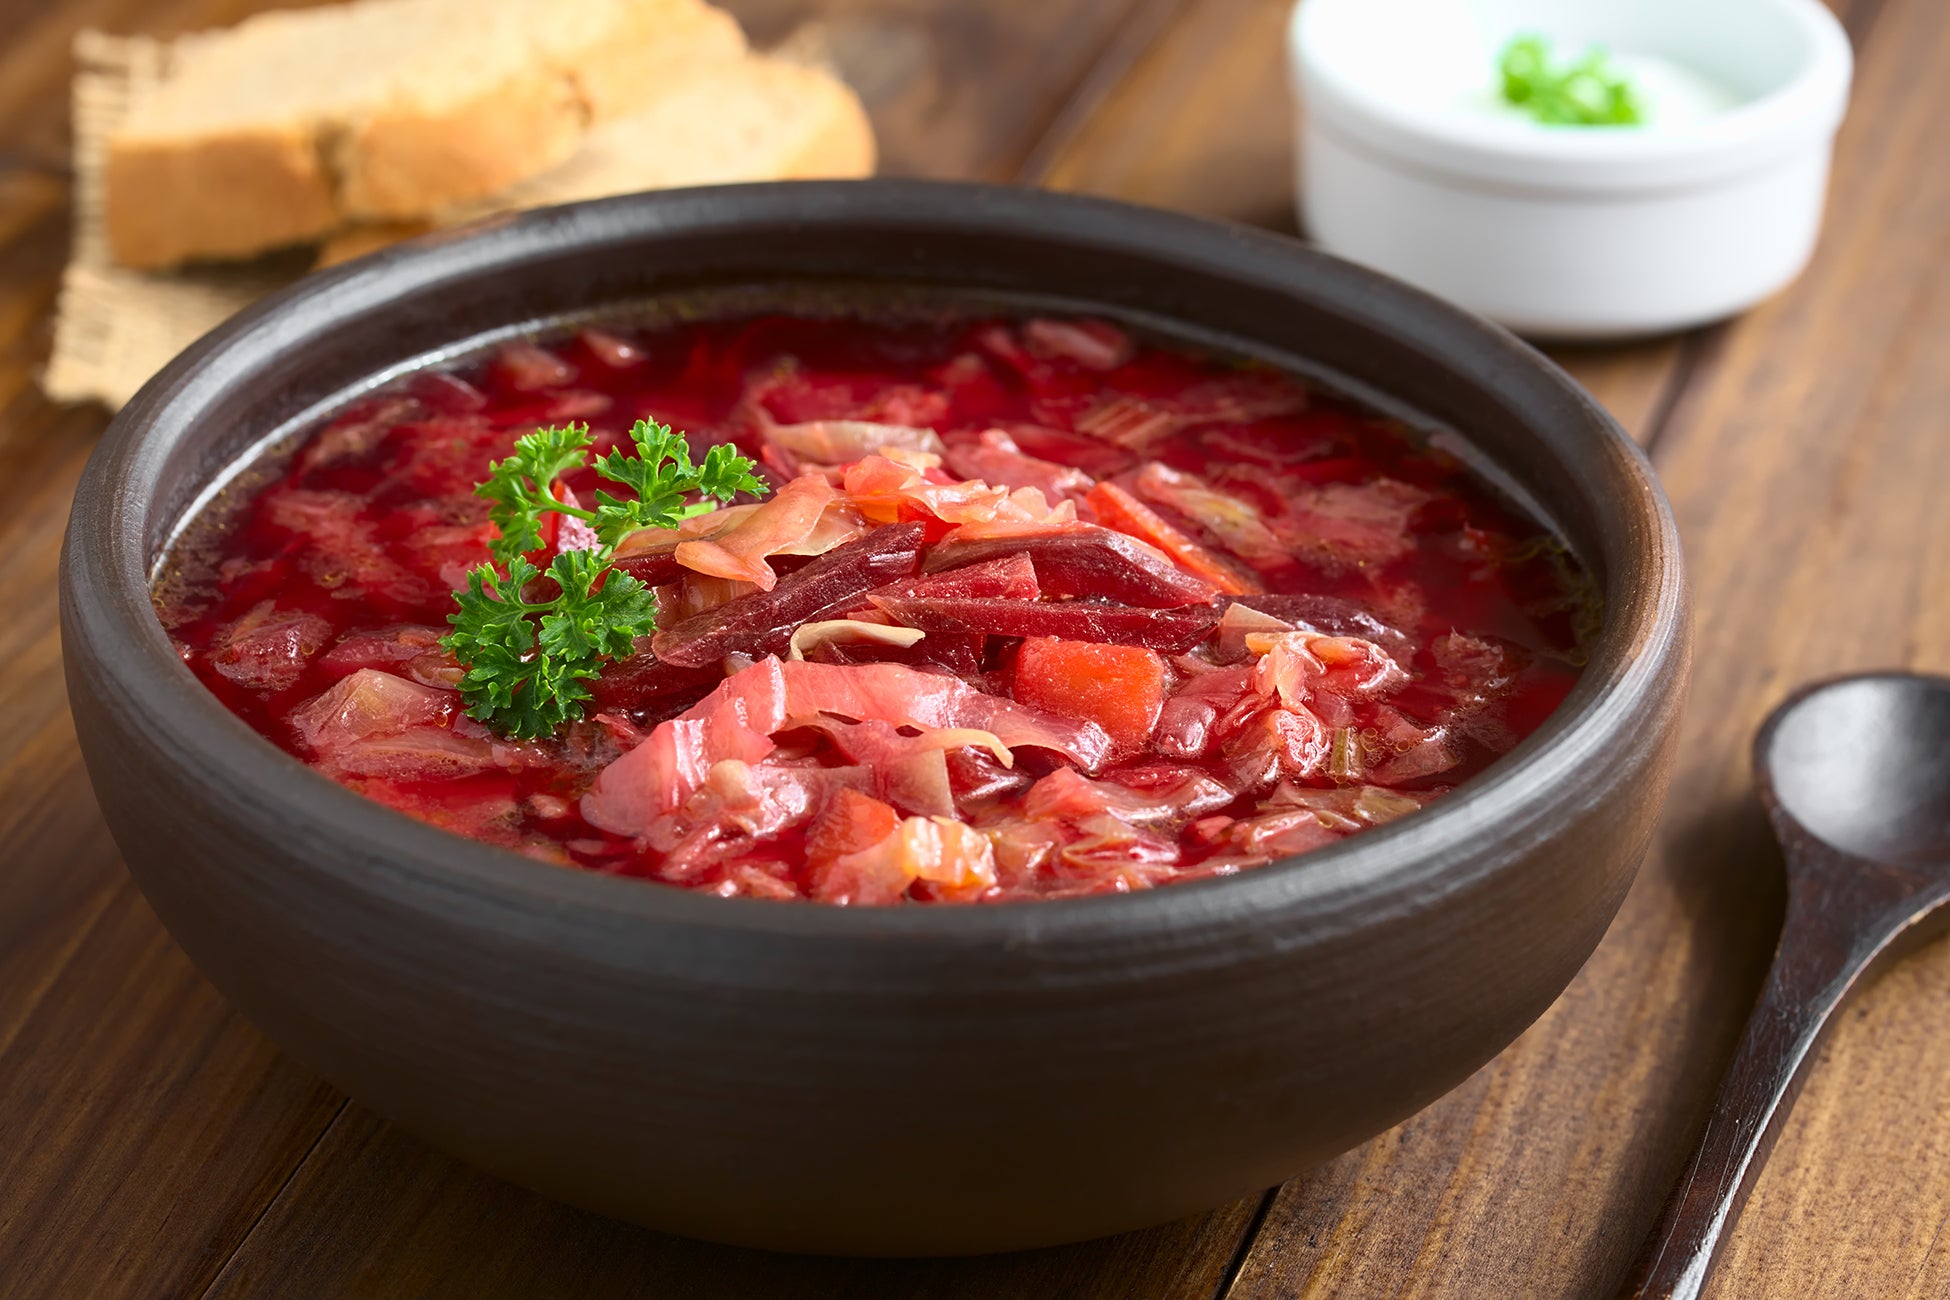 Borscht is a hearty soup made with beets, cabbage, potatoes, and sometimes meat.